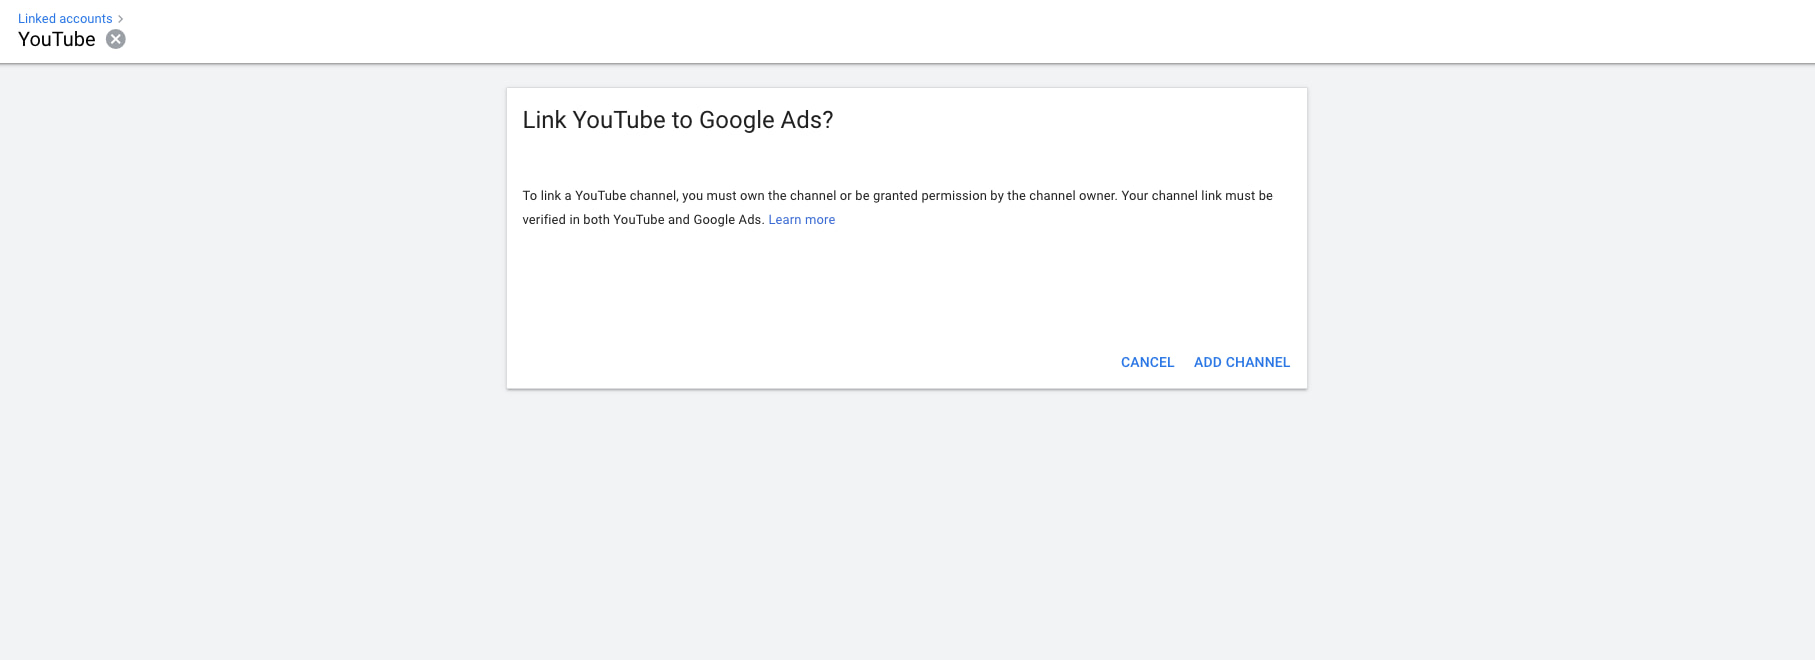 Linking YouTube channel to Google Ads